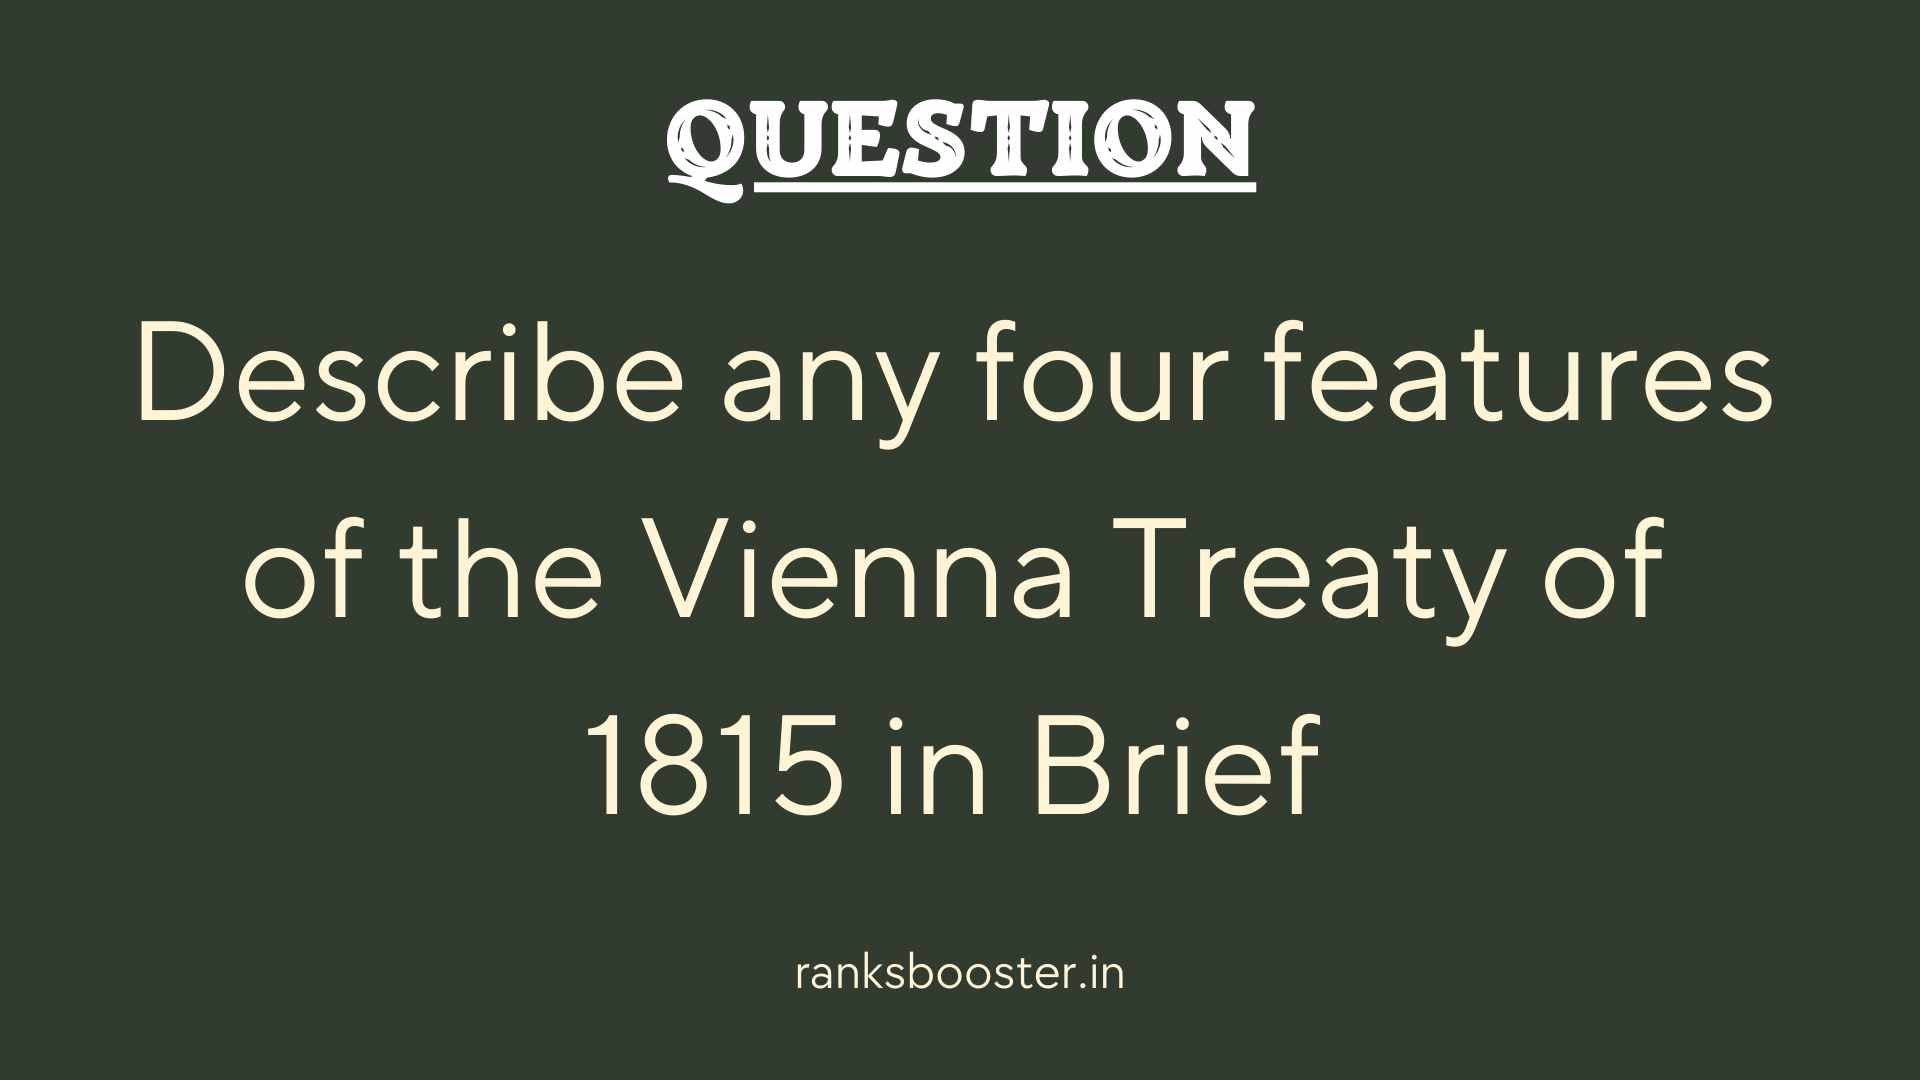 Describe any four features of the Vienna Treaty of 1815 in Brief